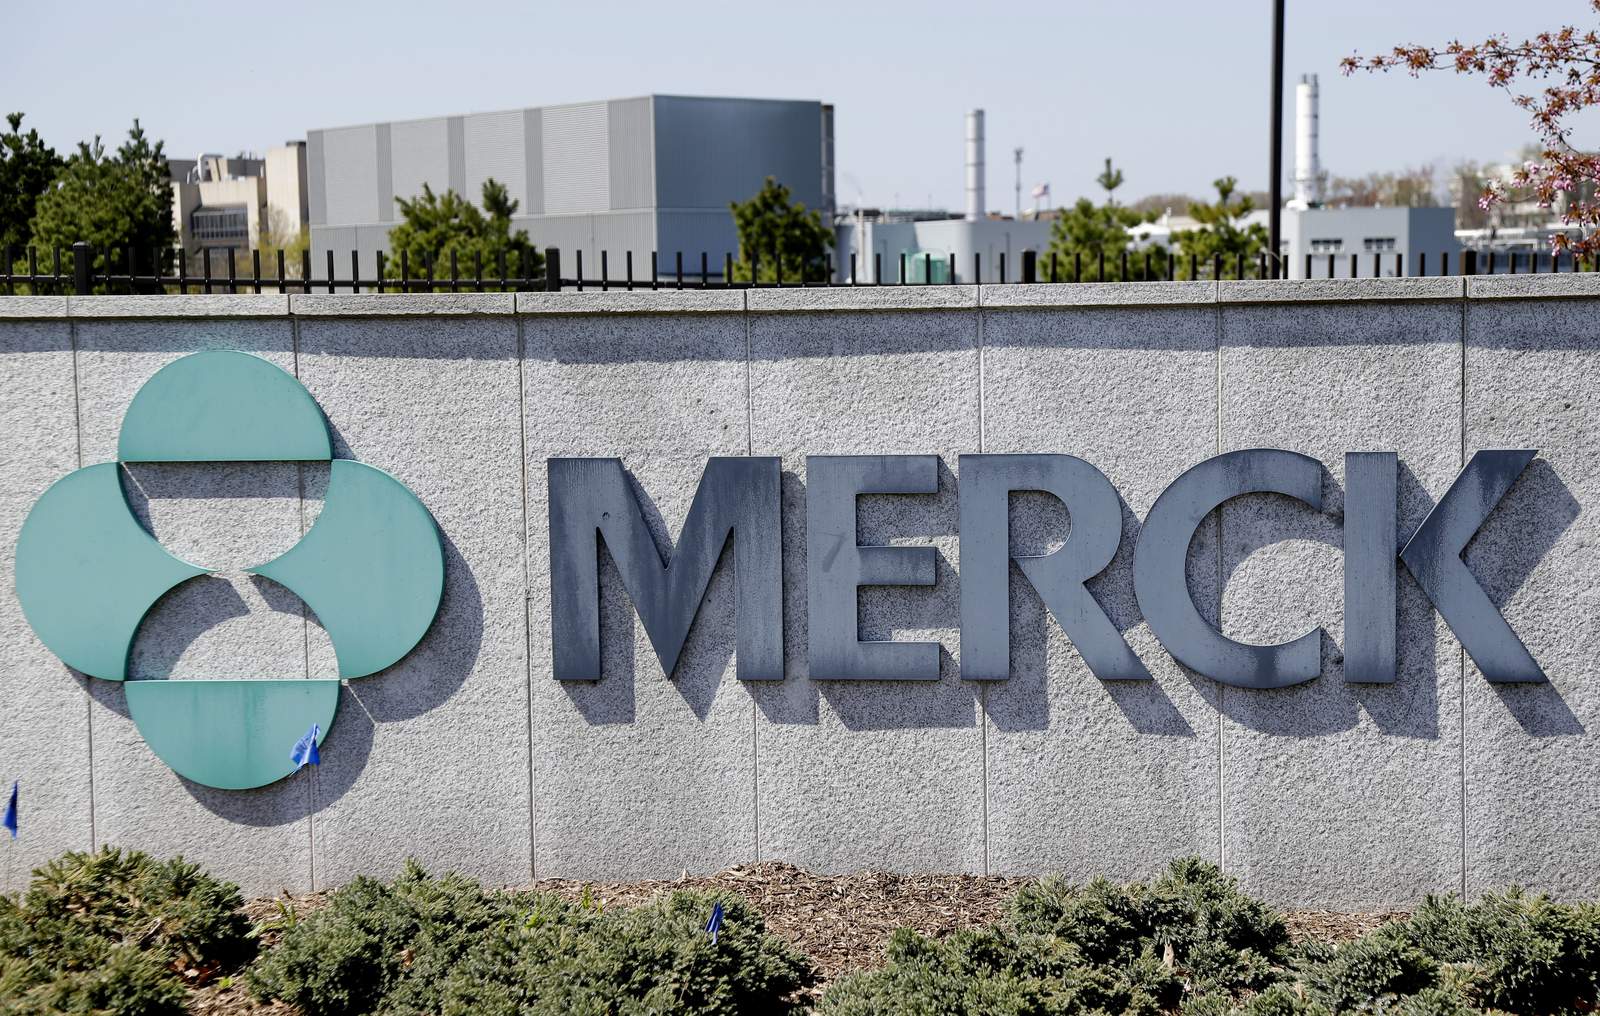 Merck ends development of two potential COVID-19 vaccines